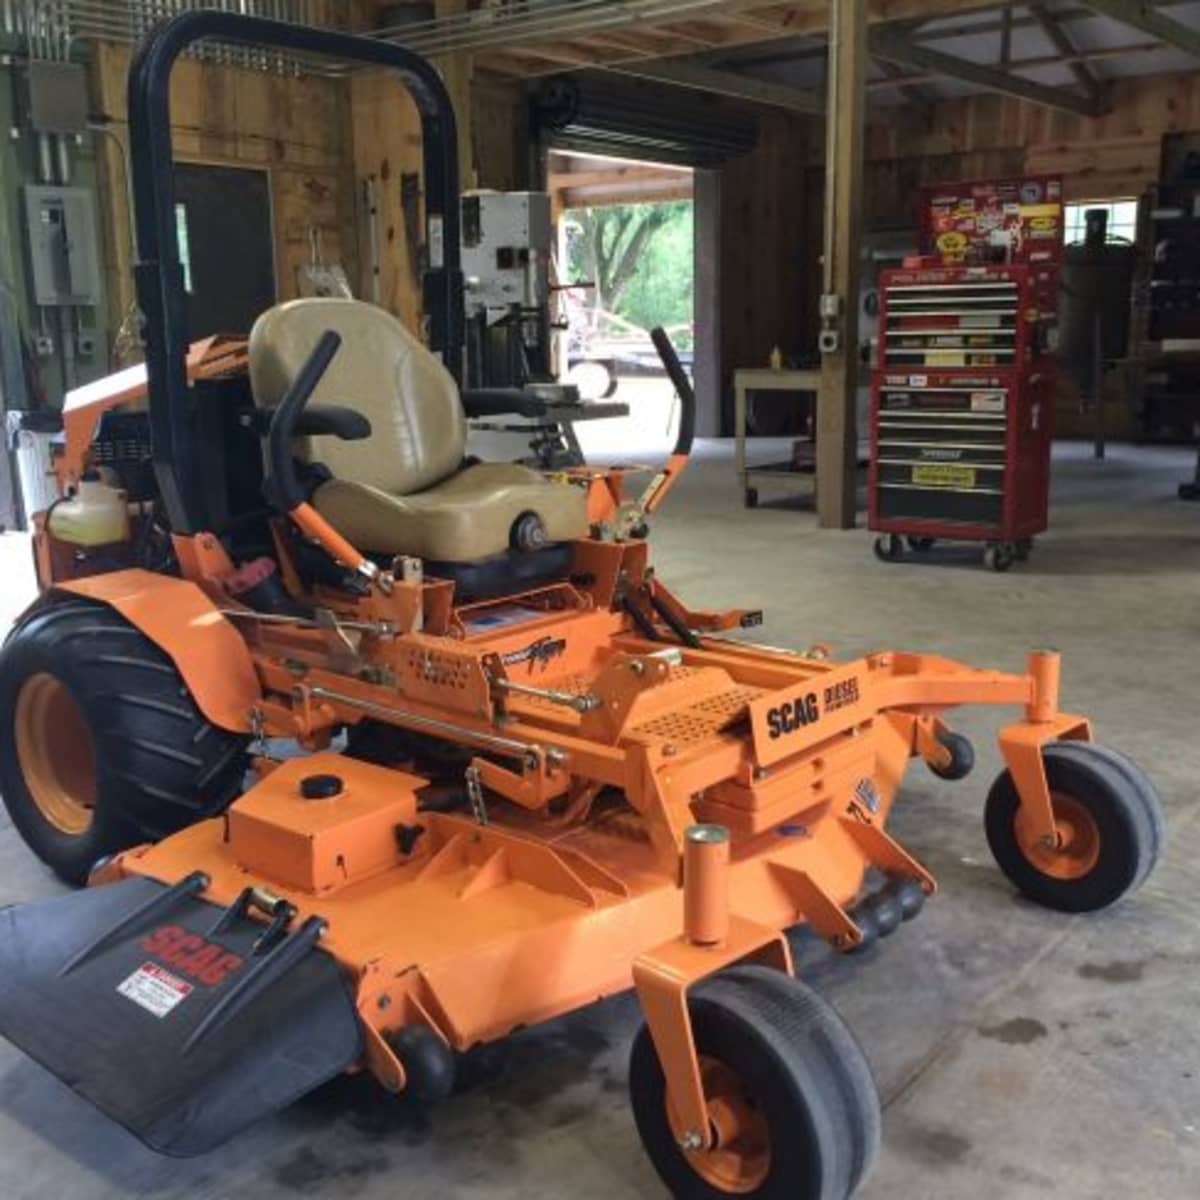 Used Commercial Zero Turn Mowers For Sale Near Me Sale Online, 54 